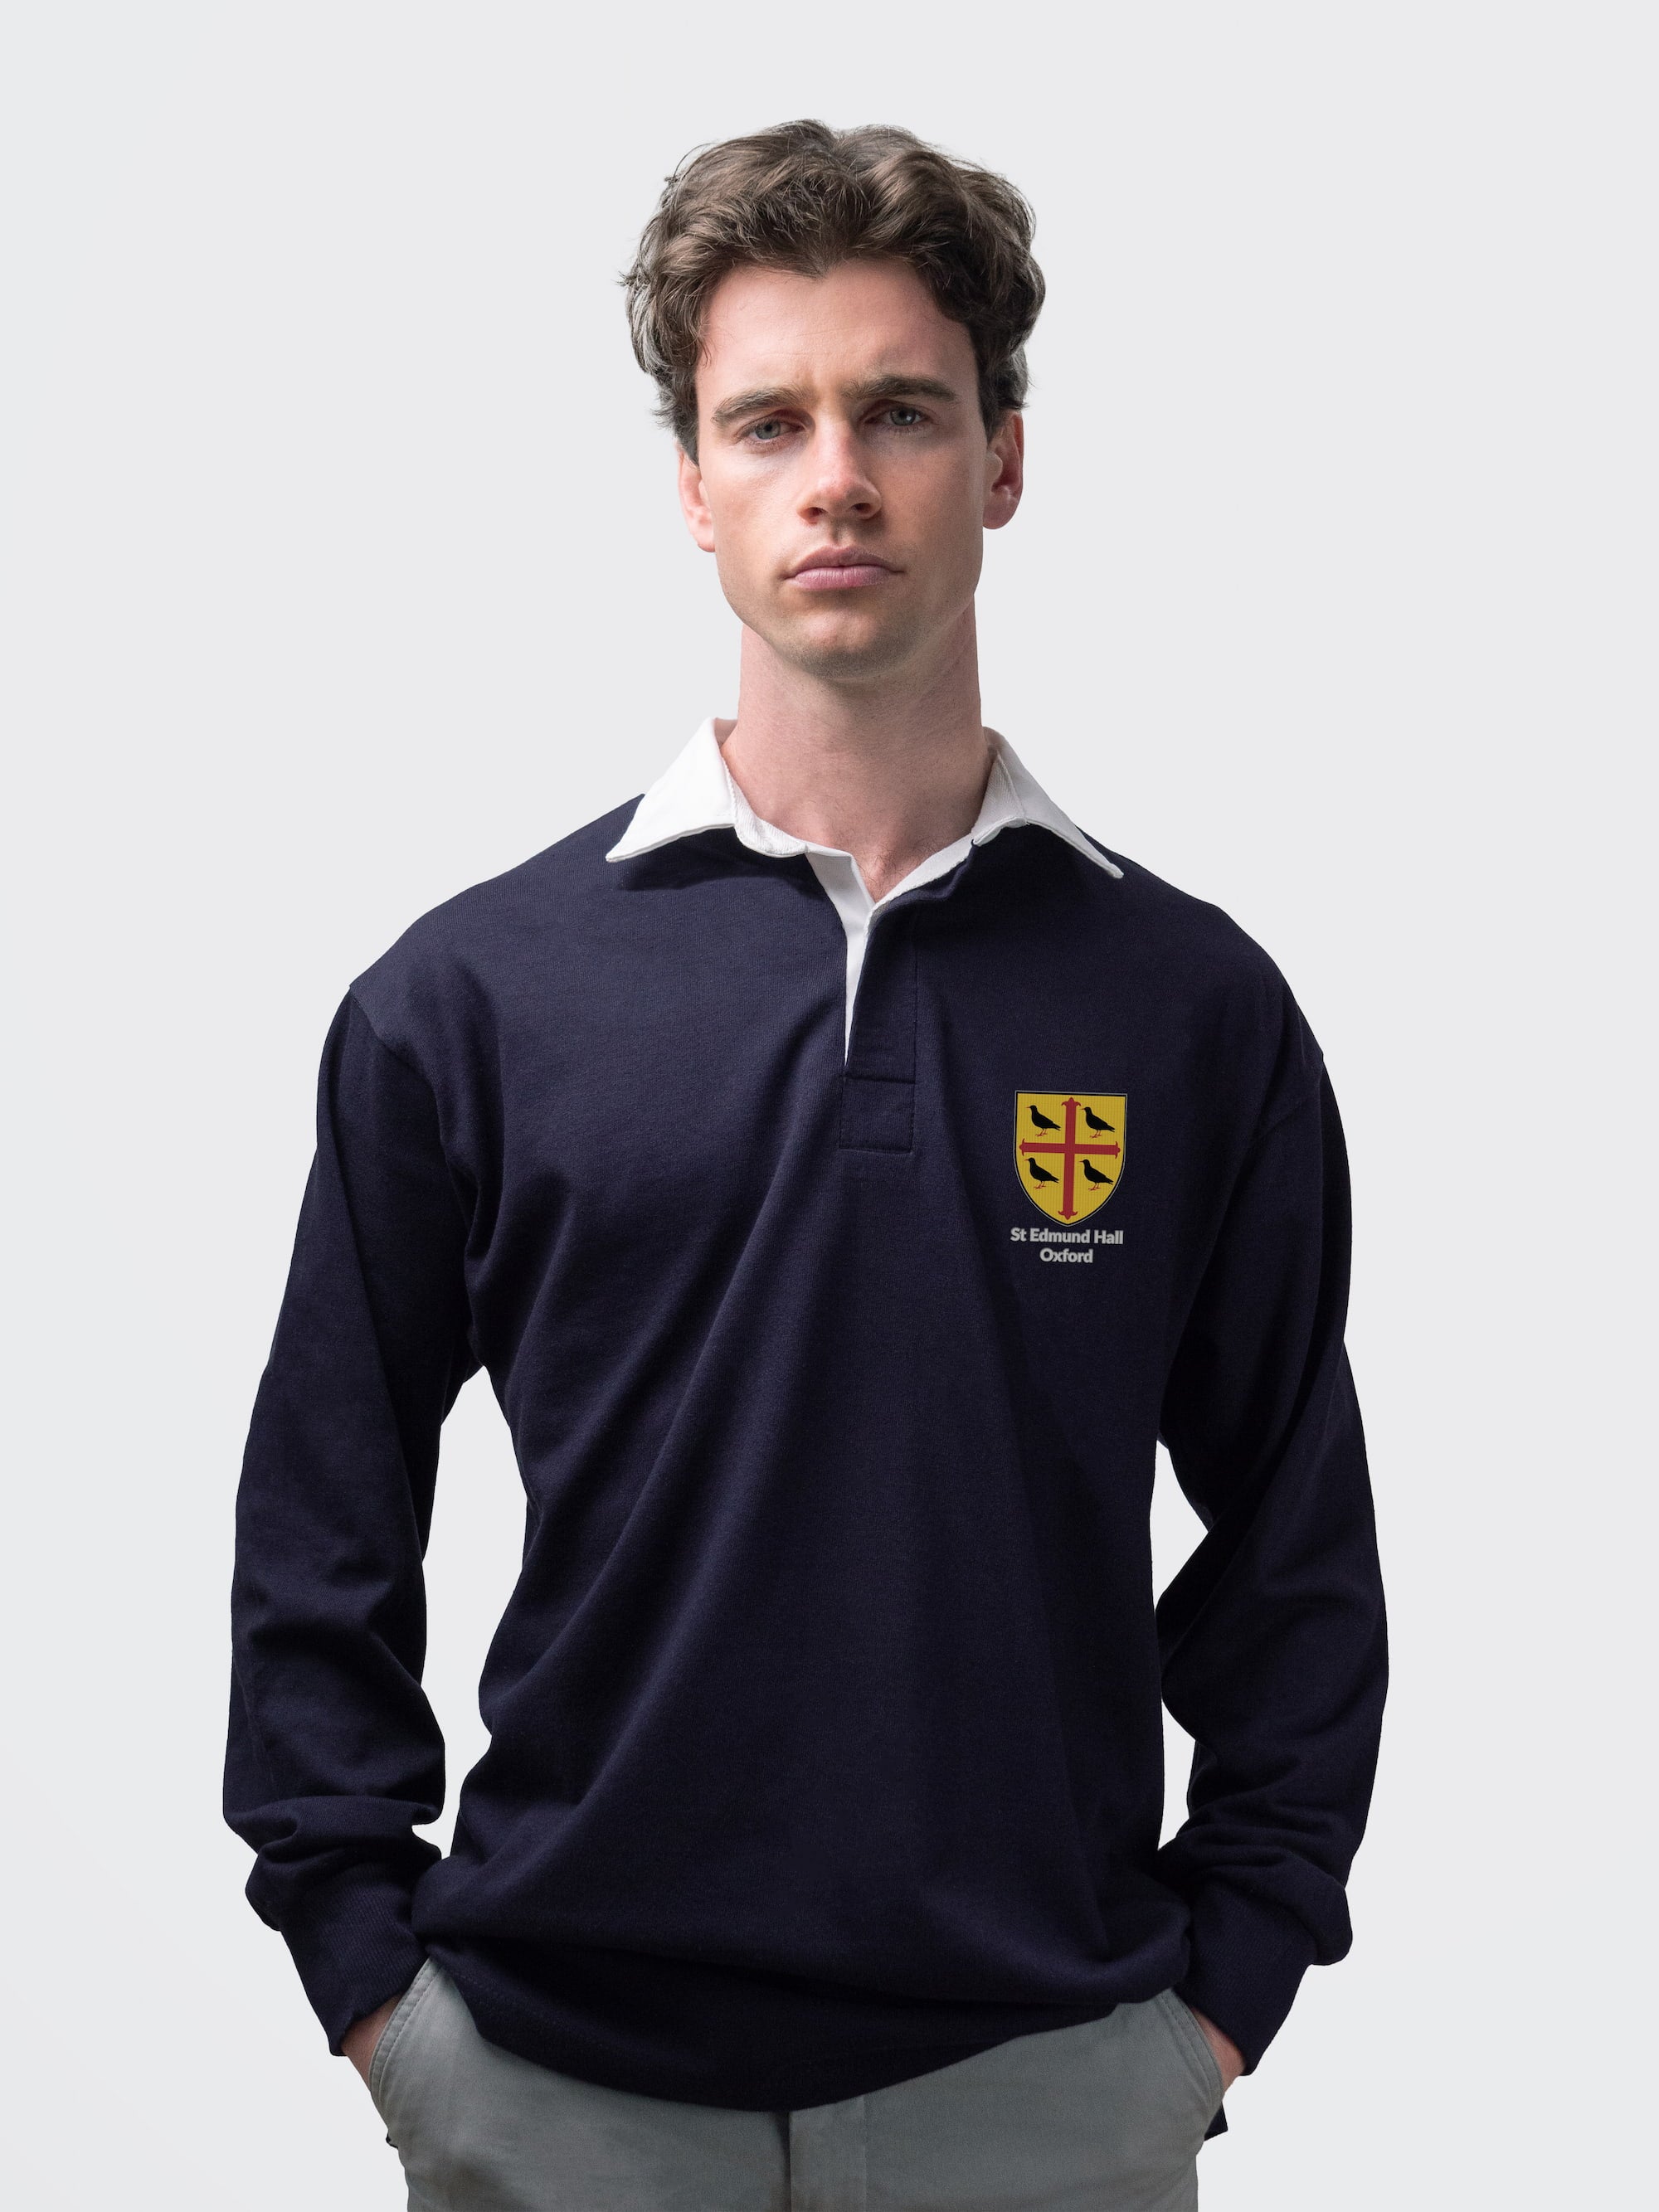 St Edmund Hall student wearing an embroidered mens rugby shirt in navy